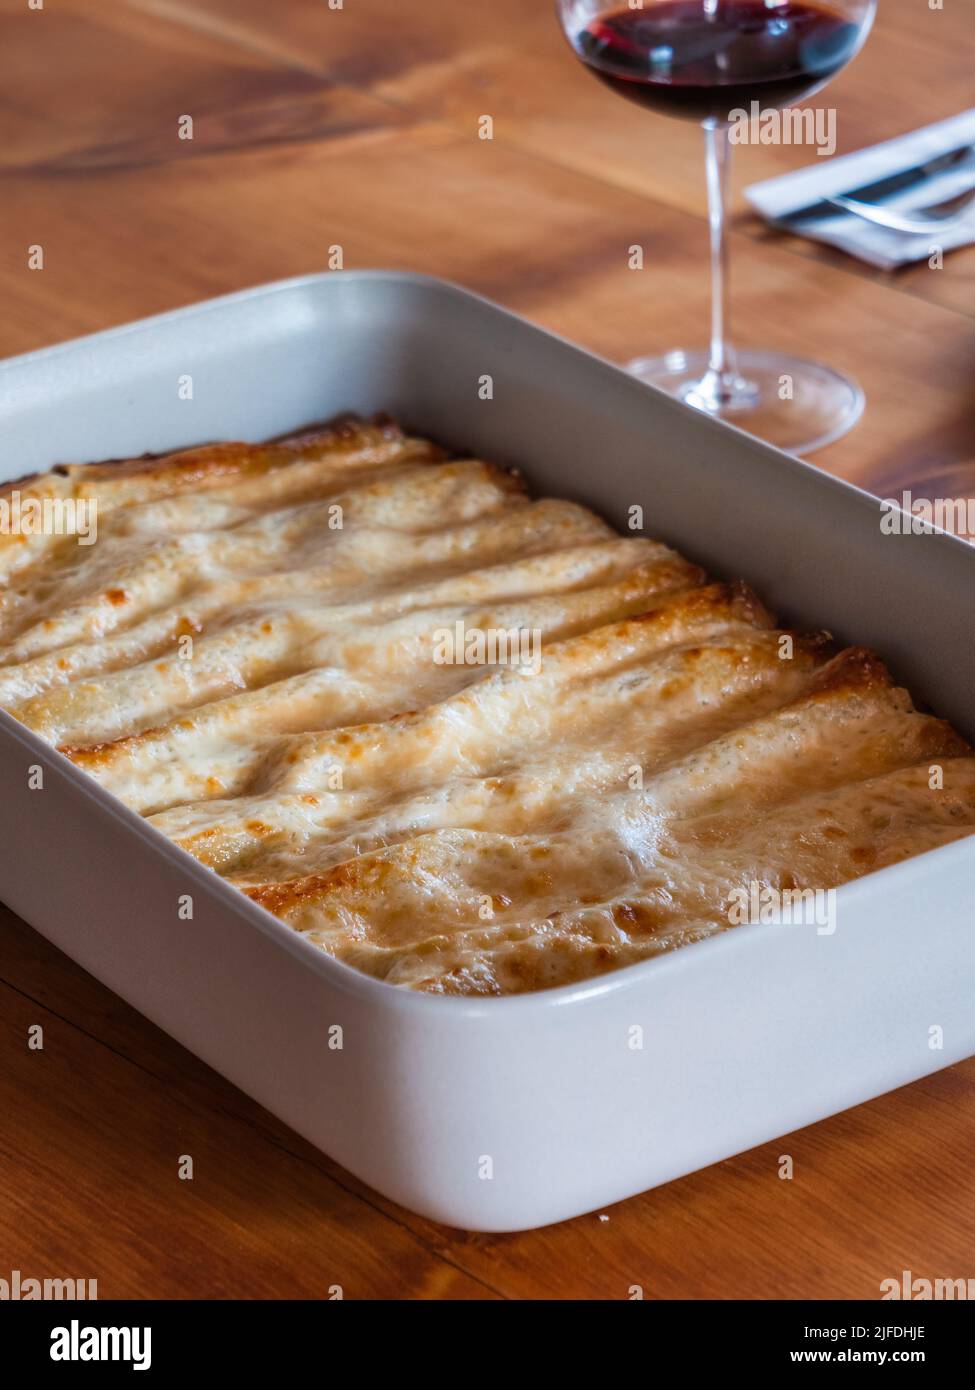 Cannelloni Ripieni di Carne in Bianco alla Umbra, Pasta Stuffed with a White Meat Ragout in the Style of Umbria Stock Photo